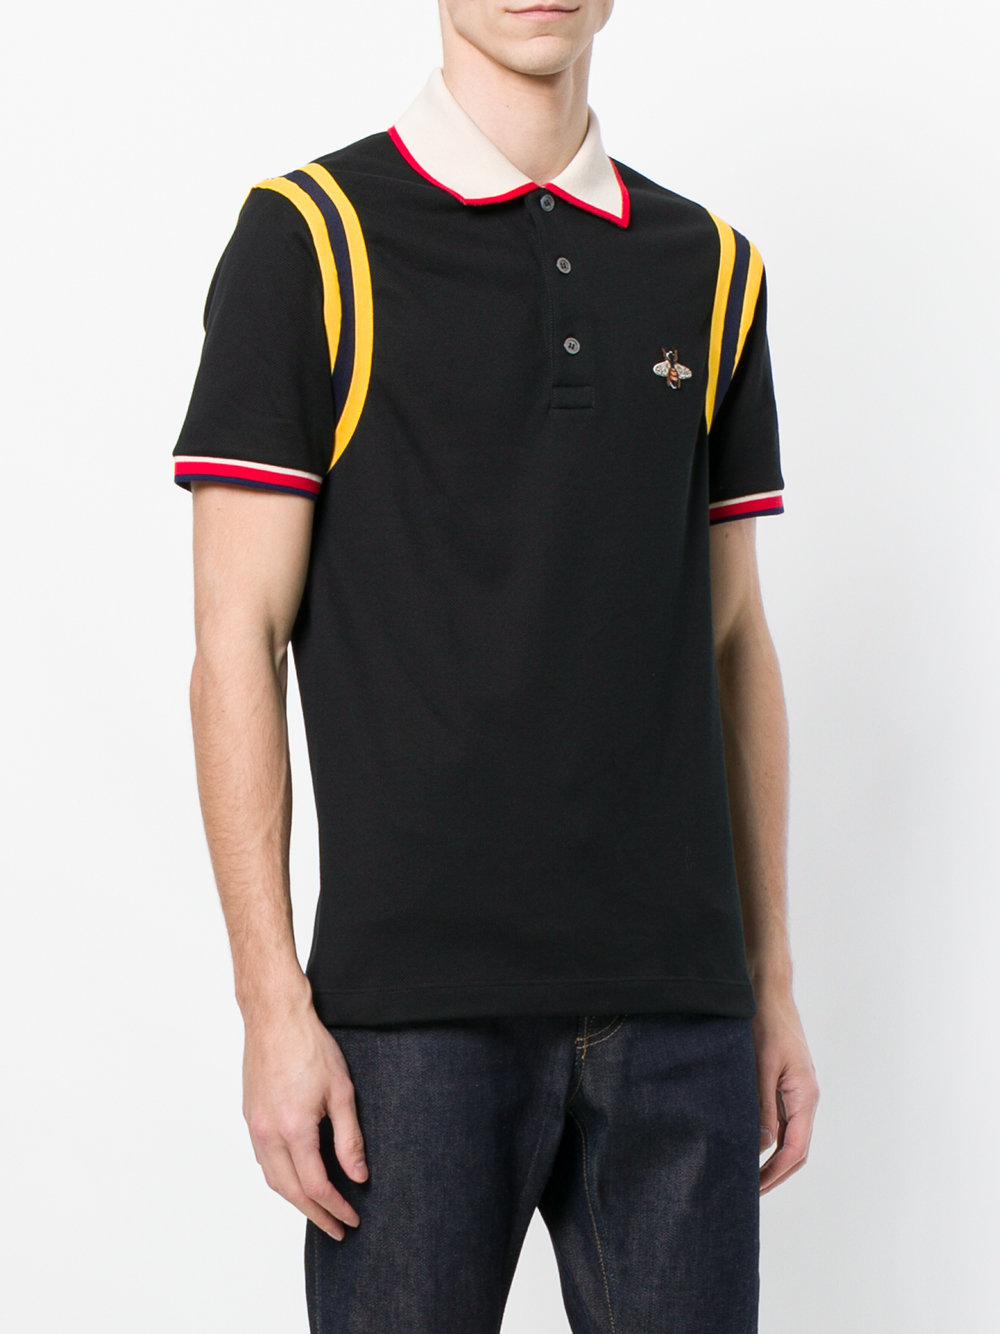 Gucci Cotton Bee Patch Polo Shirt in Black for Men - Lyst